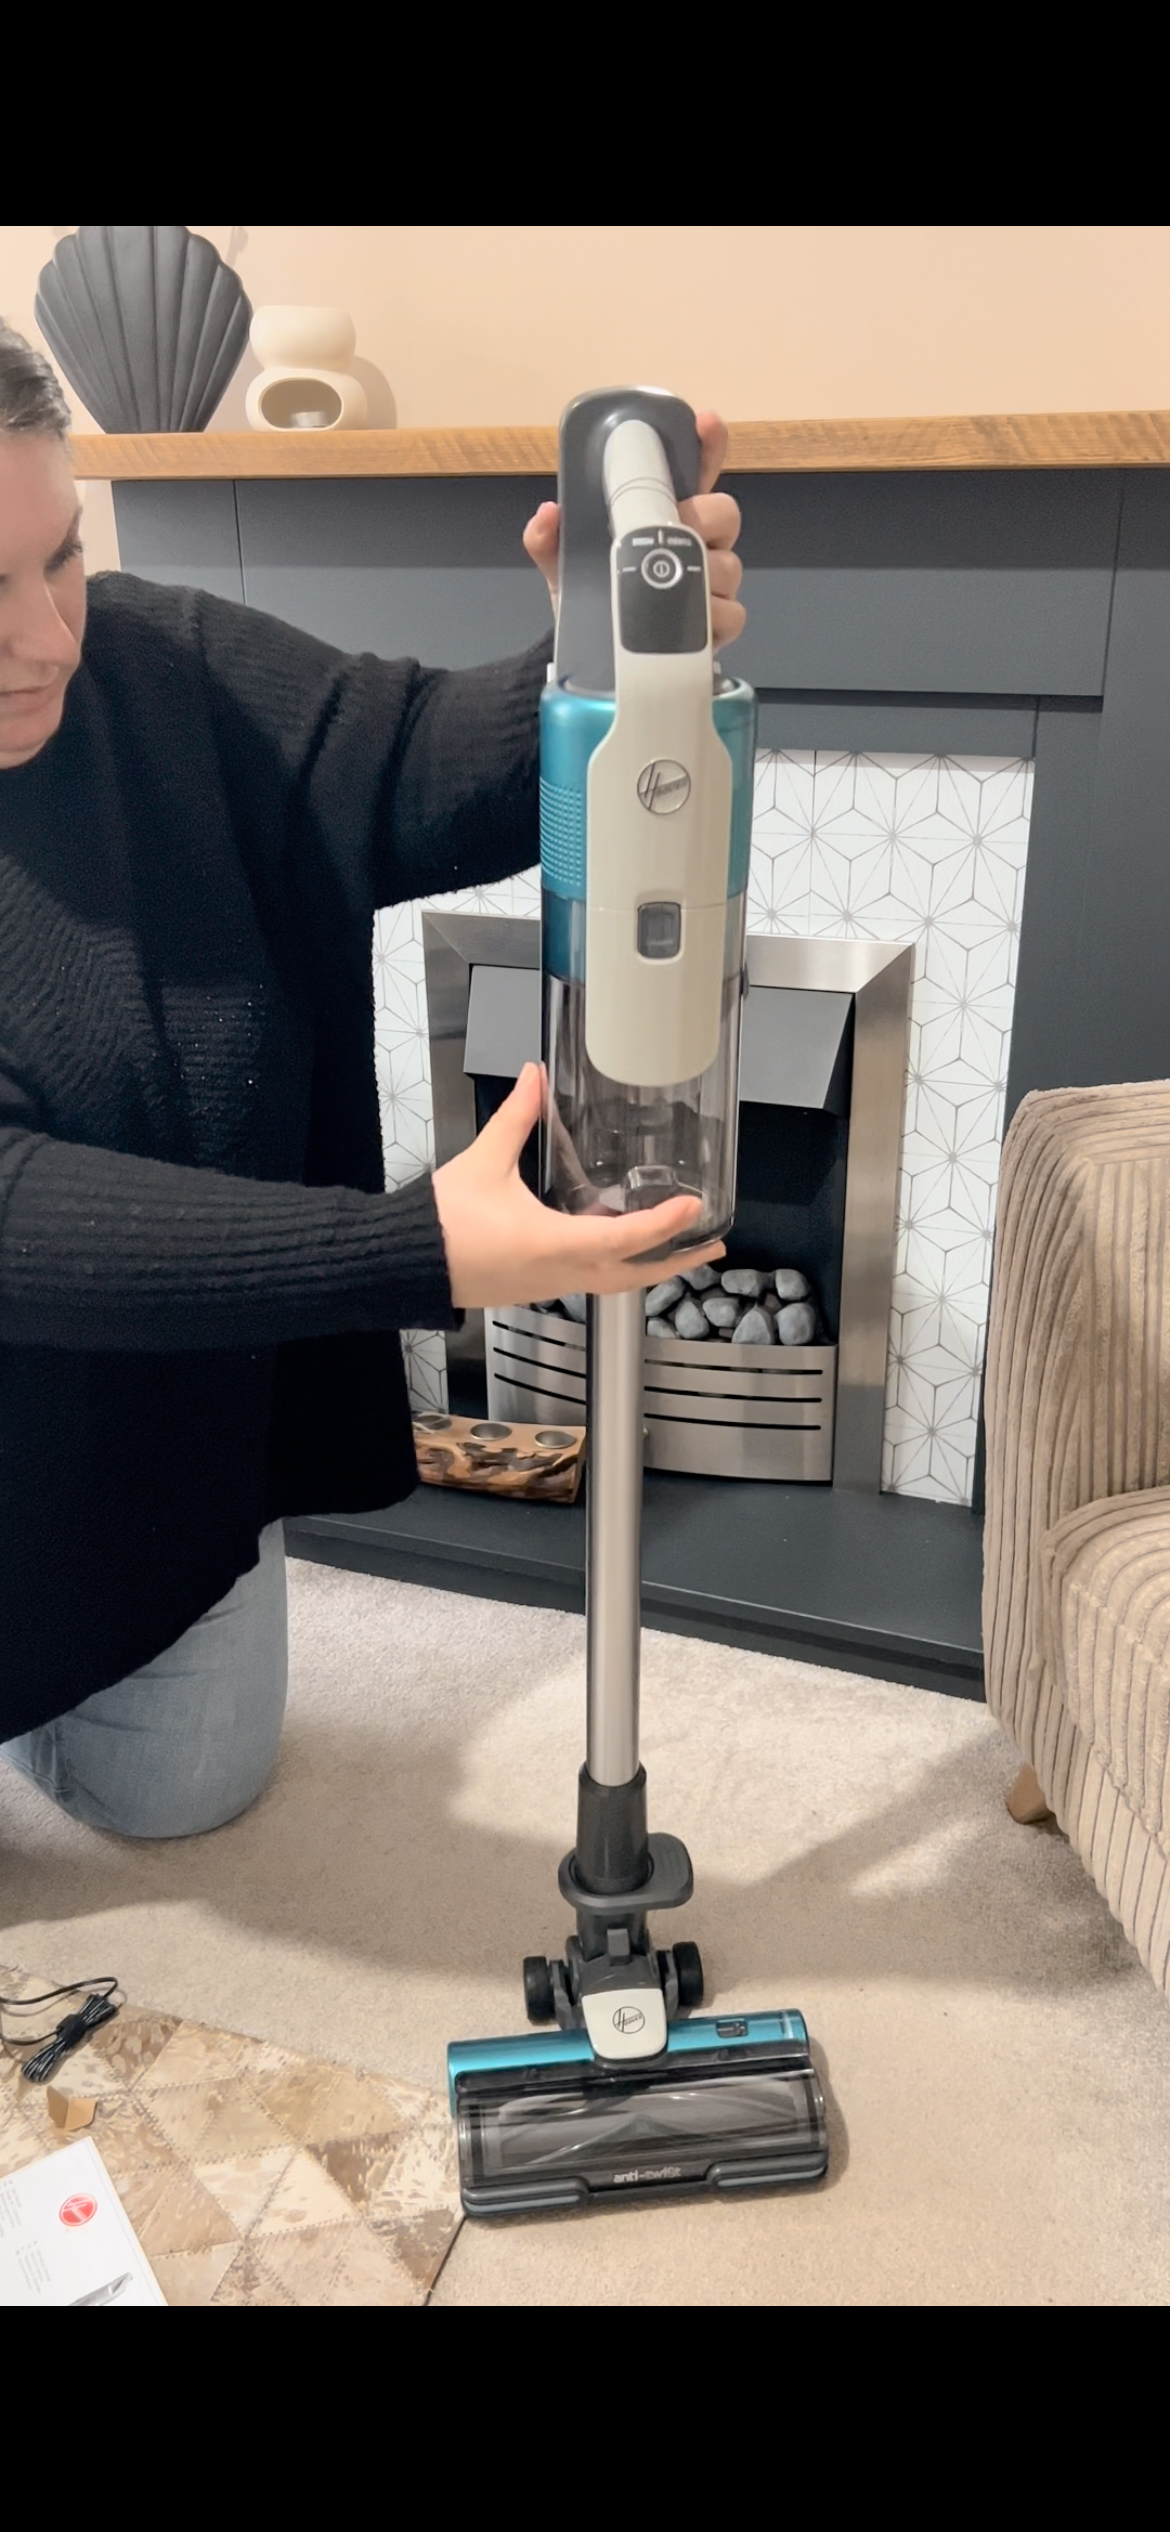 Hoover HF9 Pet - my review - Makes, Bakes and Decor